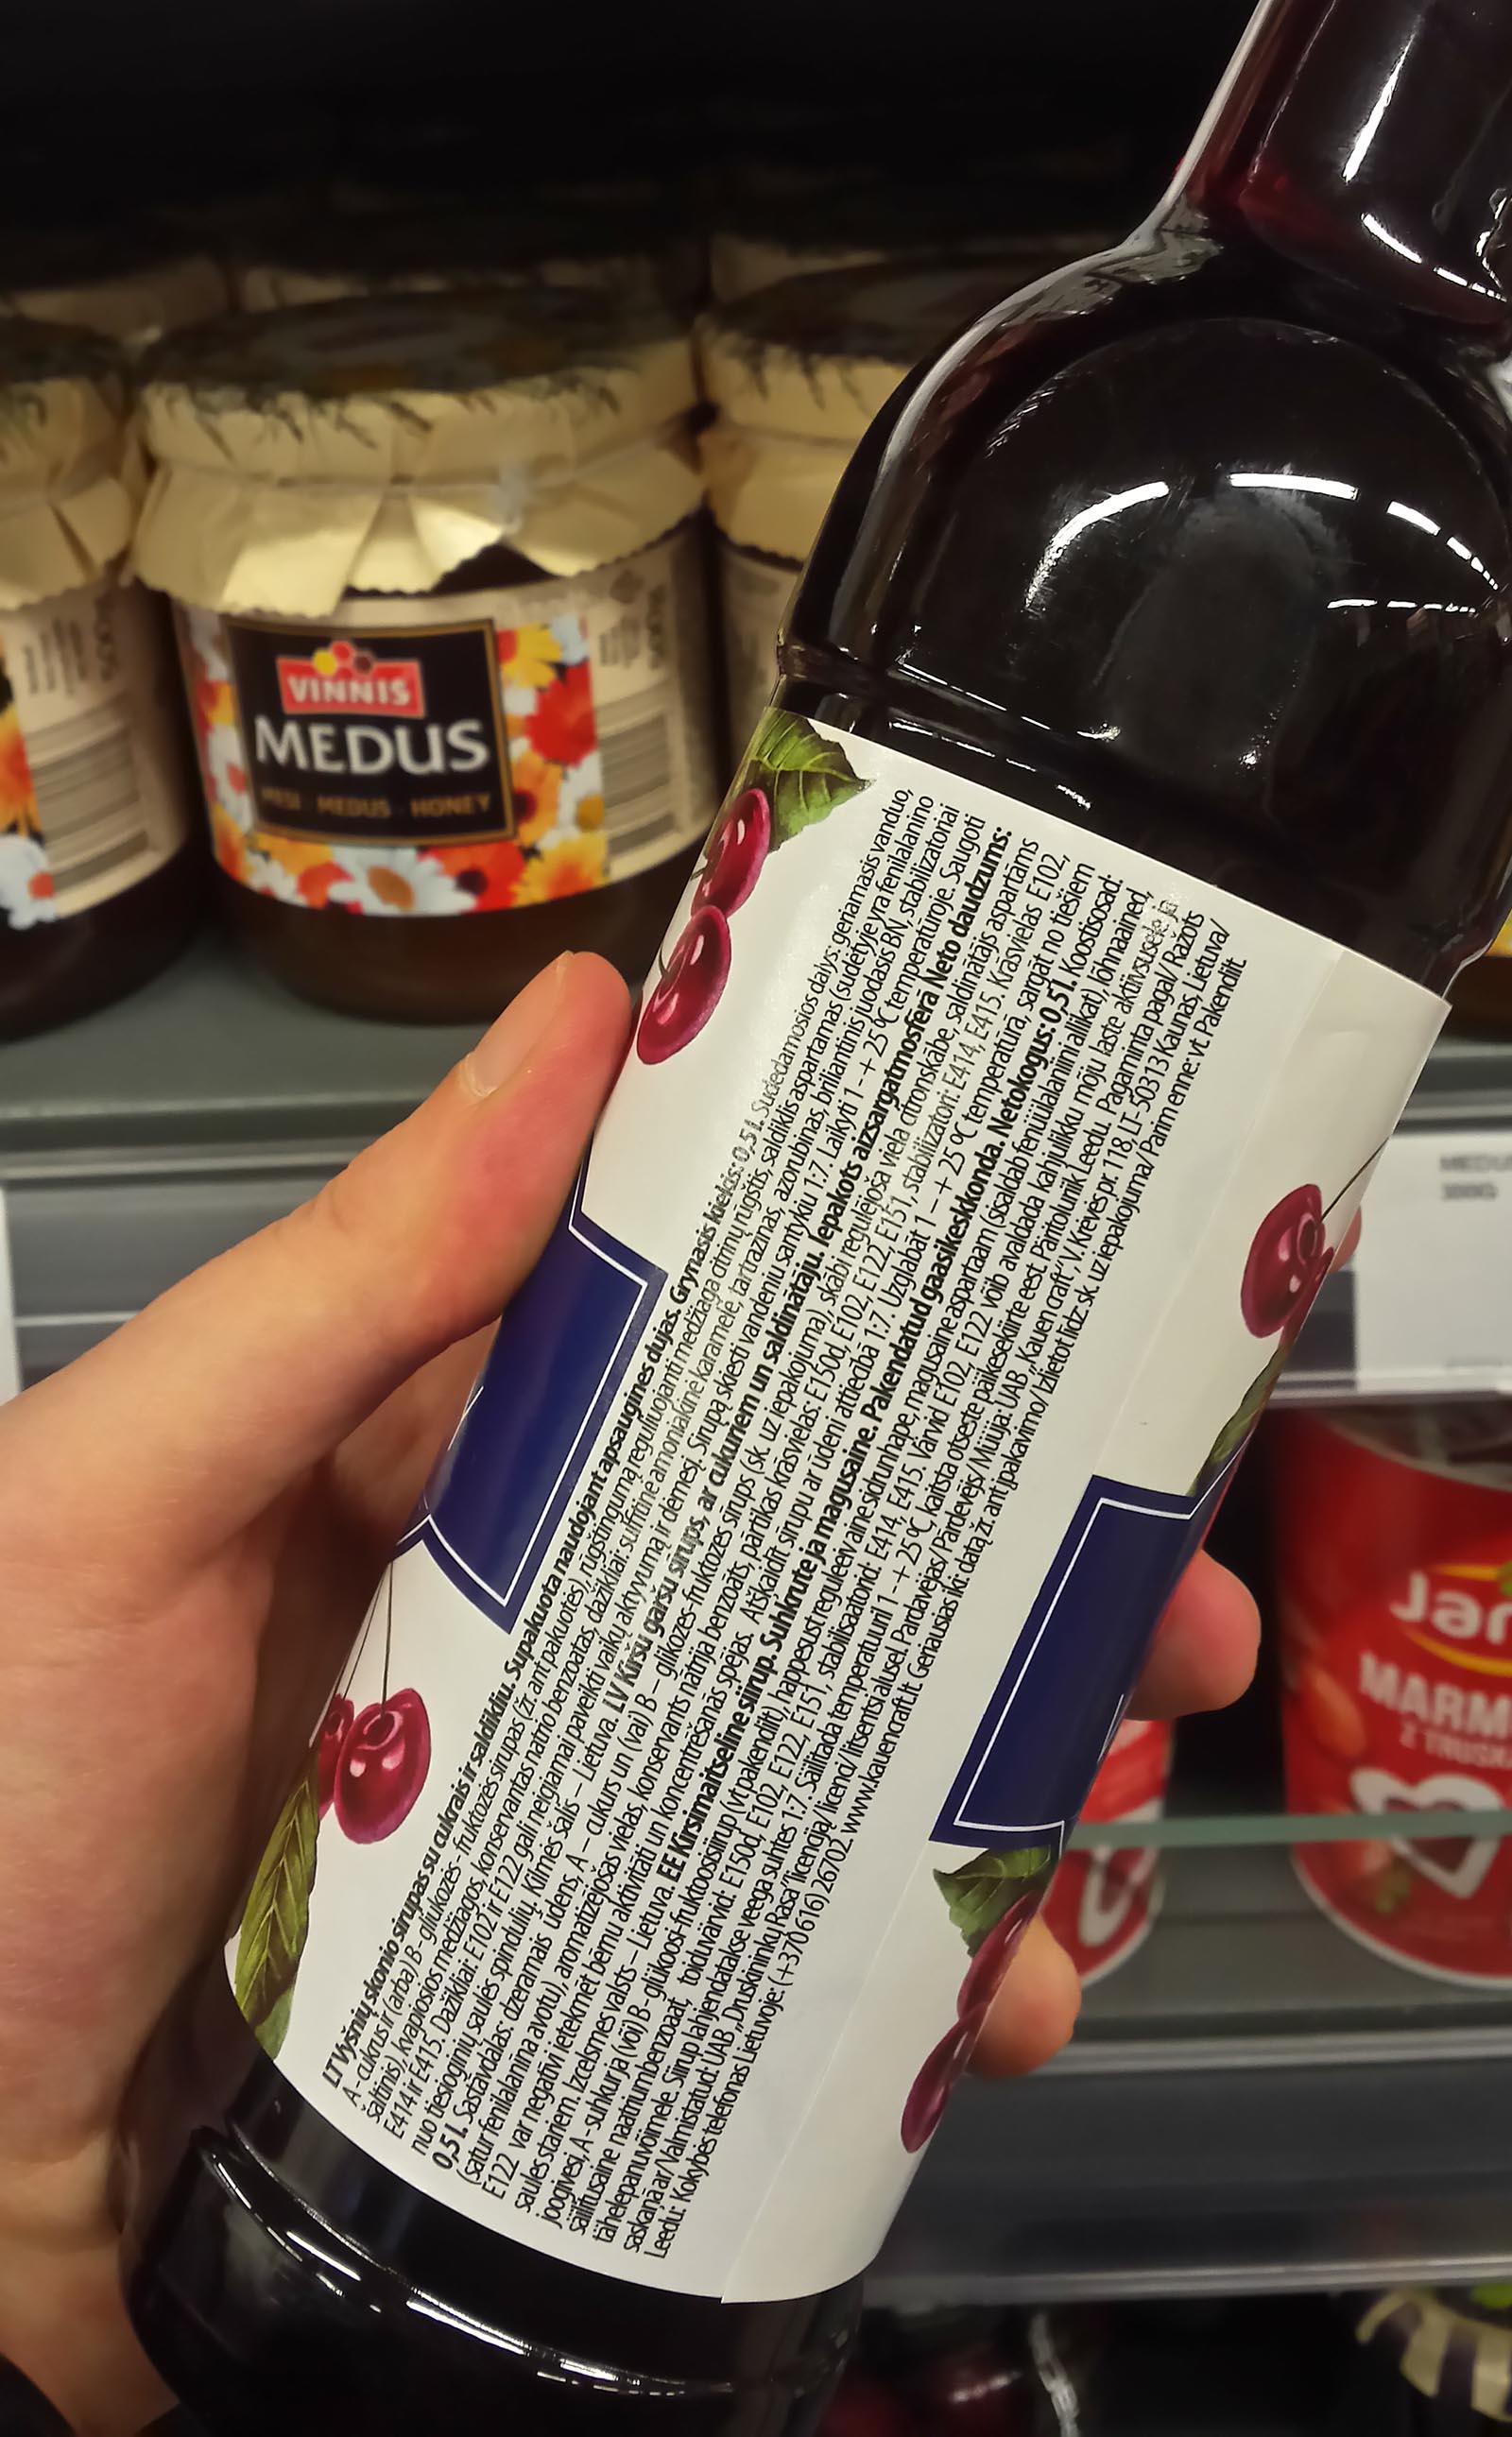 Ingredient list of the "cherry" syrup.